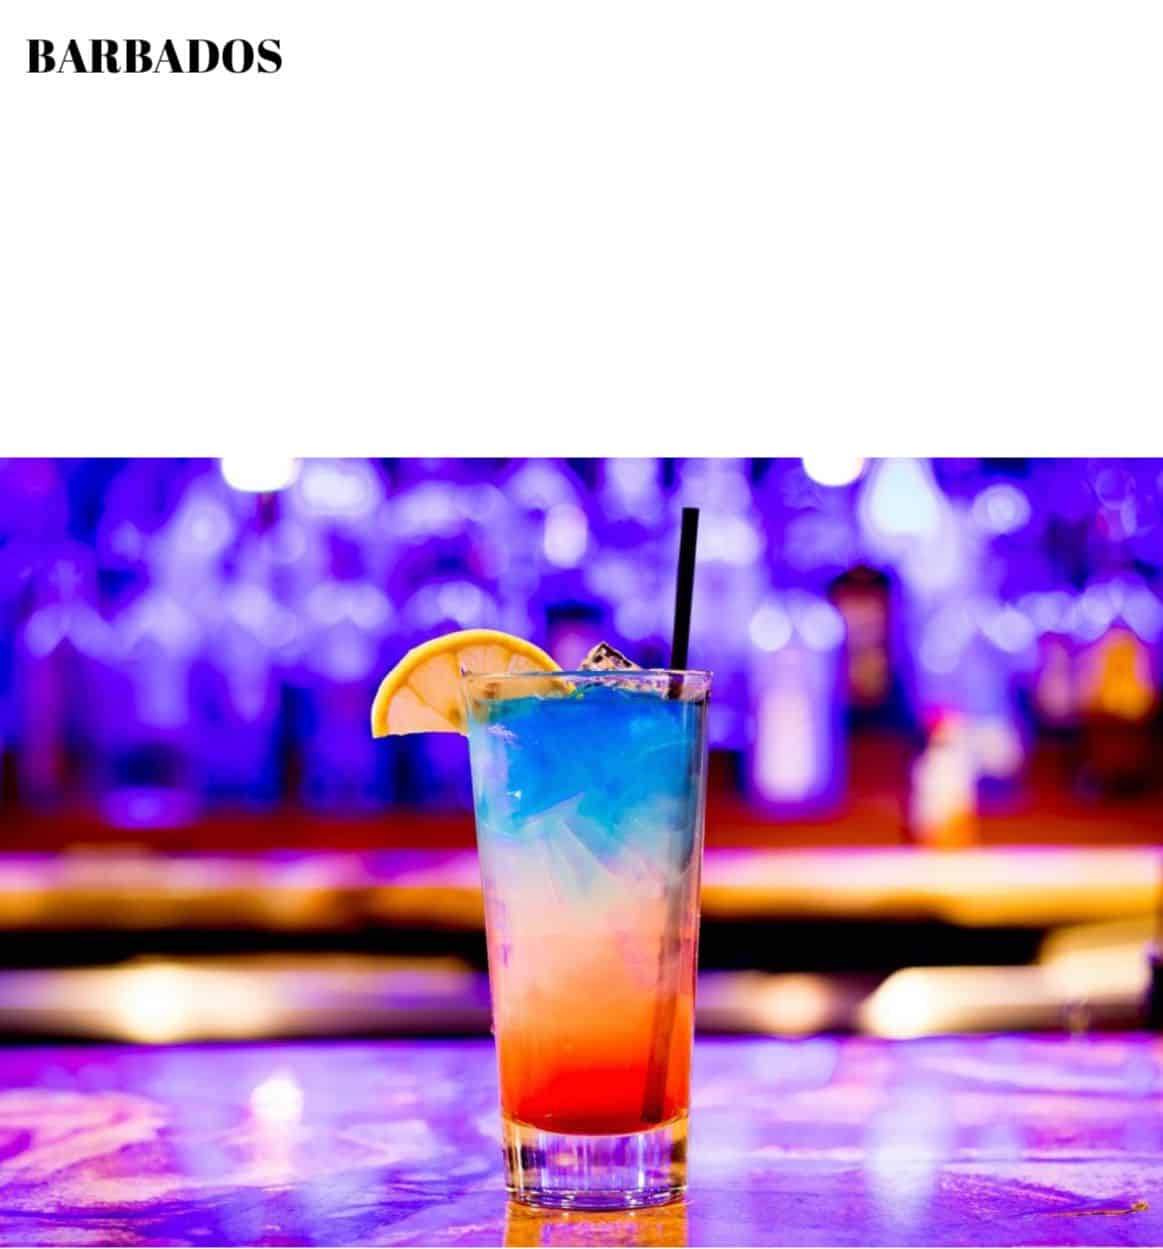 A colorful drink on a bar.